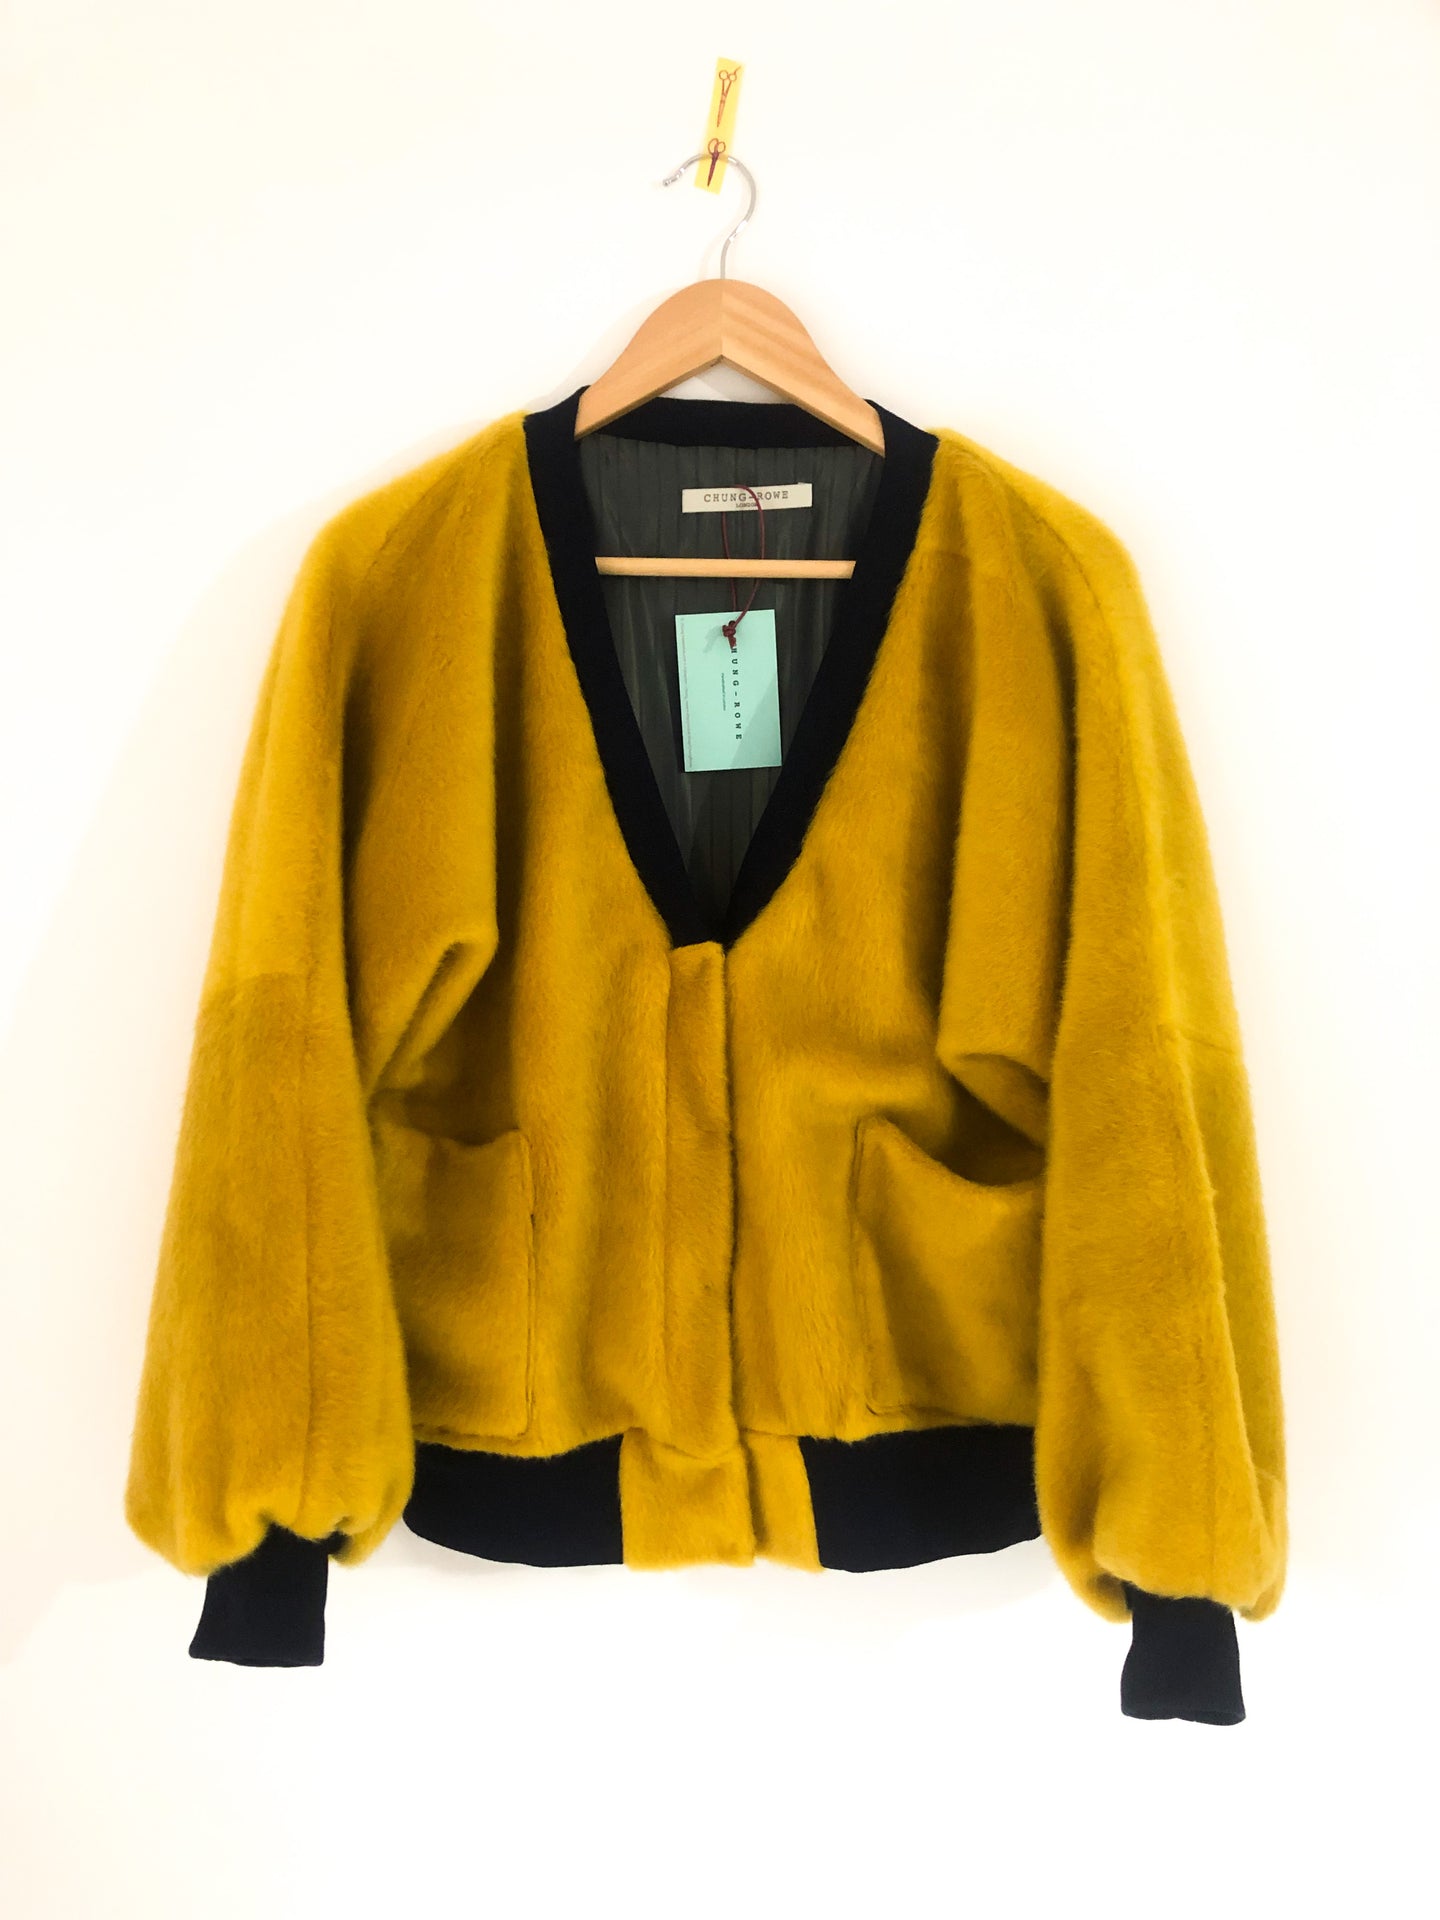 MOHAIR WOVEN Jackets Yellow by Chung Rowe